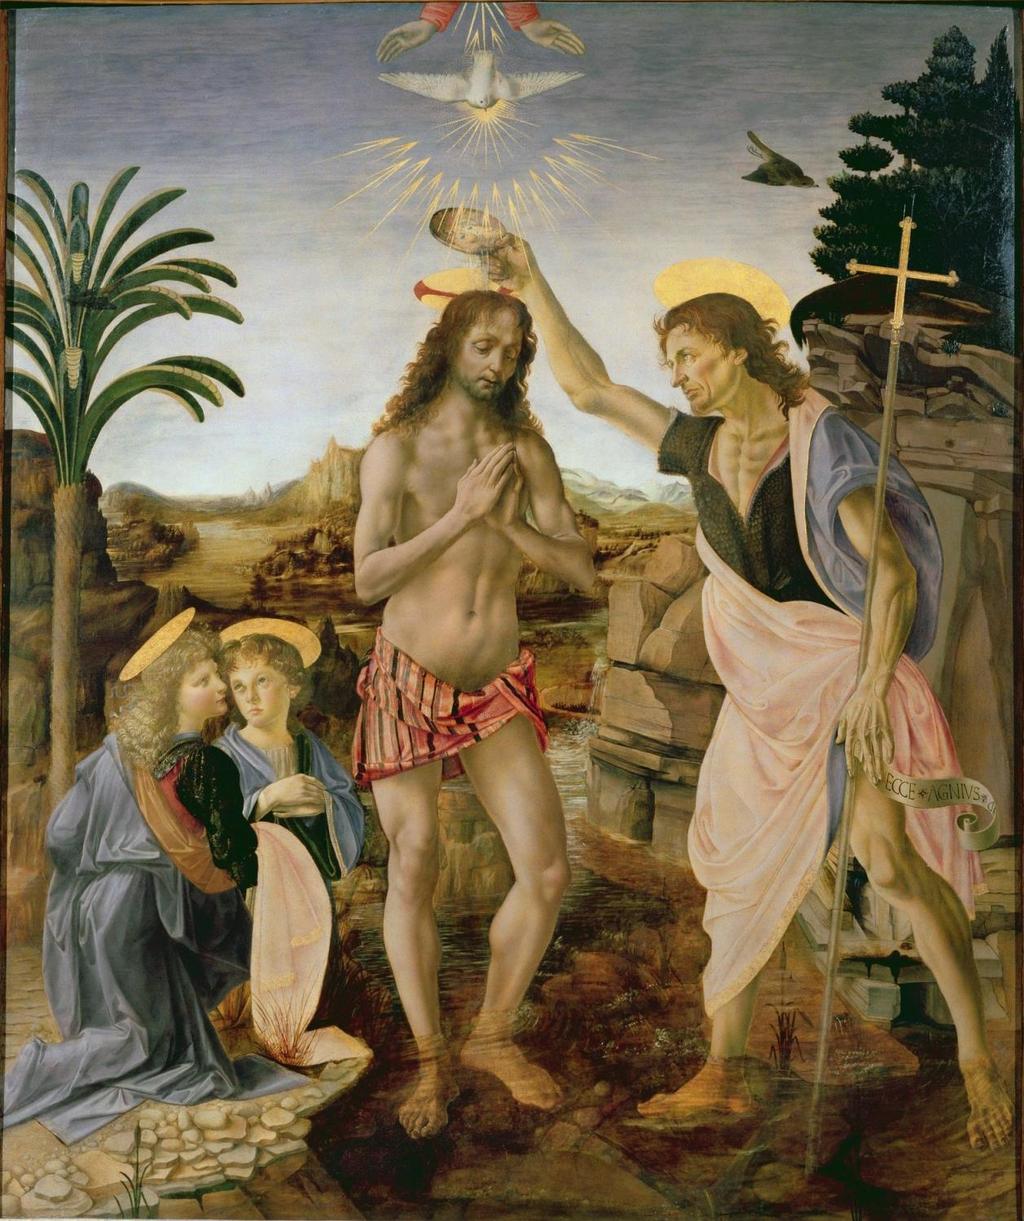 FEAST OF THE BAPTISM OF THE LORD JANUARY 13, 2019 CATHEDRAL NOTES RECTOR OF